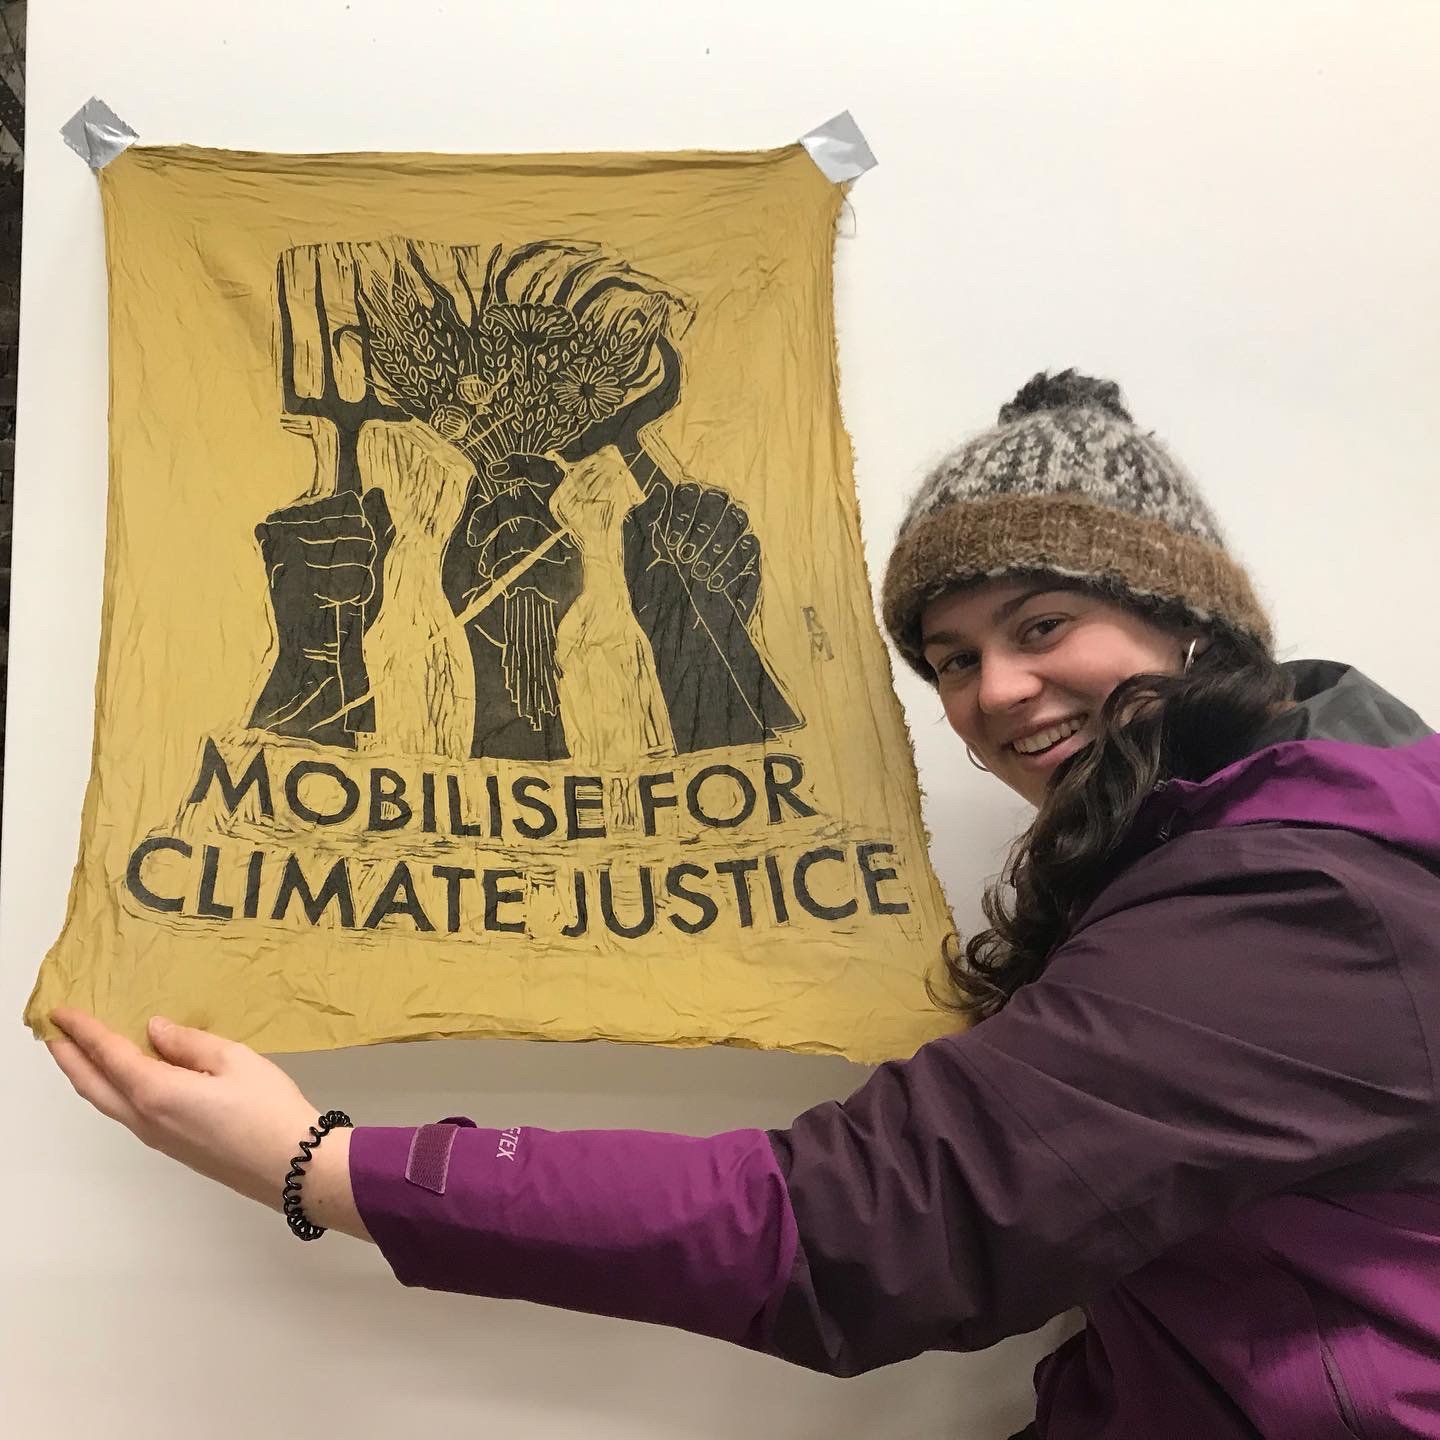 Twenty-one year old Iris Gillingham from Livingston Manor traveled to Glasgow, Scotland and attended the COP26 global climate conference.